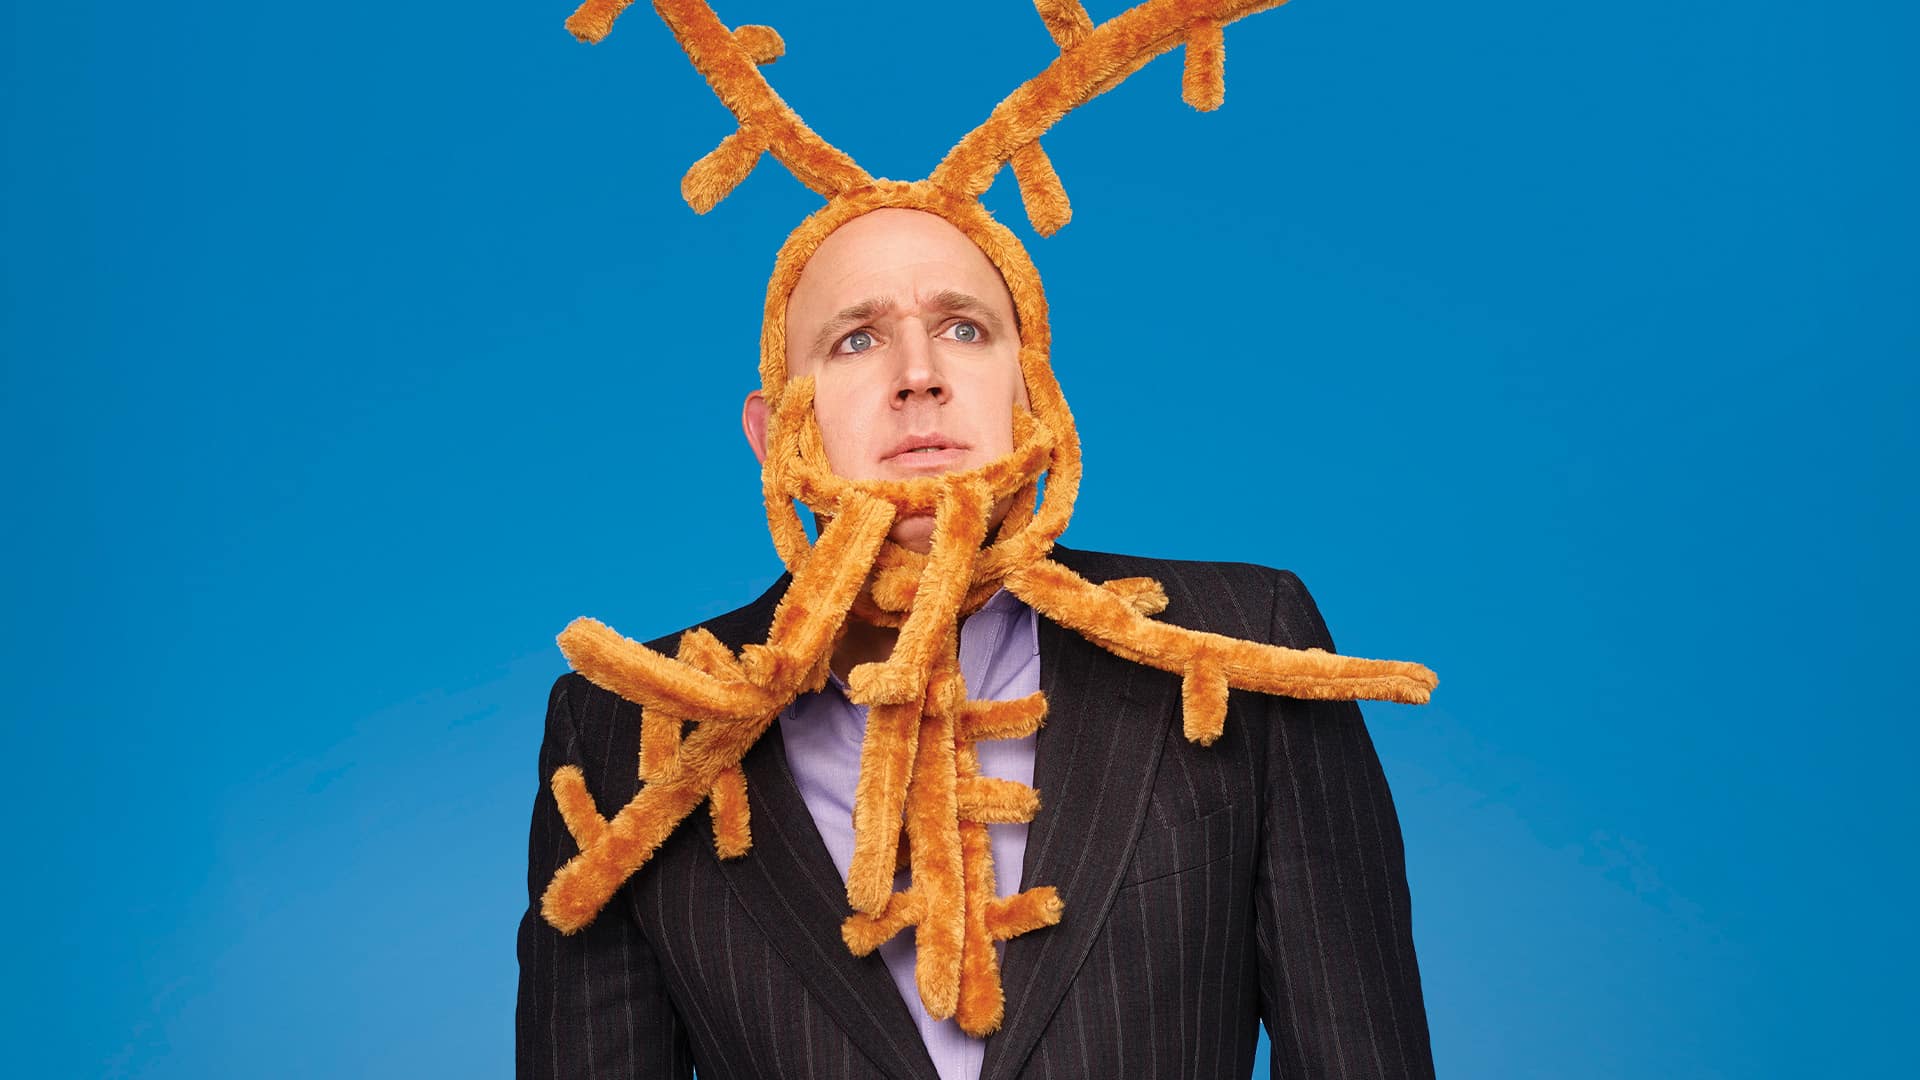 Tim Vine: Breeeep! artwork. Blue background. Tim Vine, wearing multiple toy reindeer antlers around his face, and a pinstripe suit over a light grey / pink shirt, looks off camera with a confused expression.